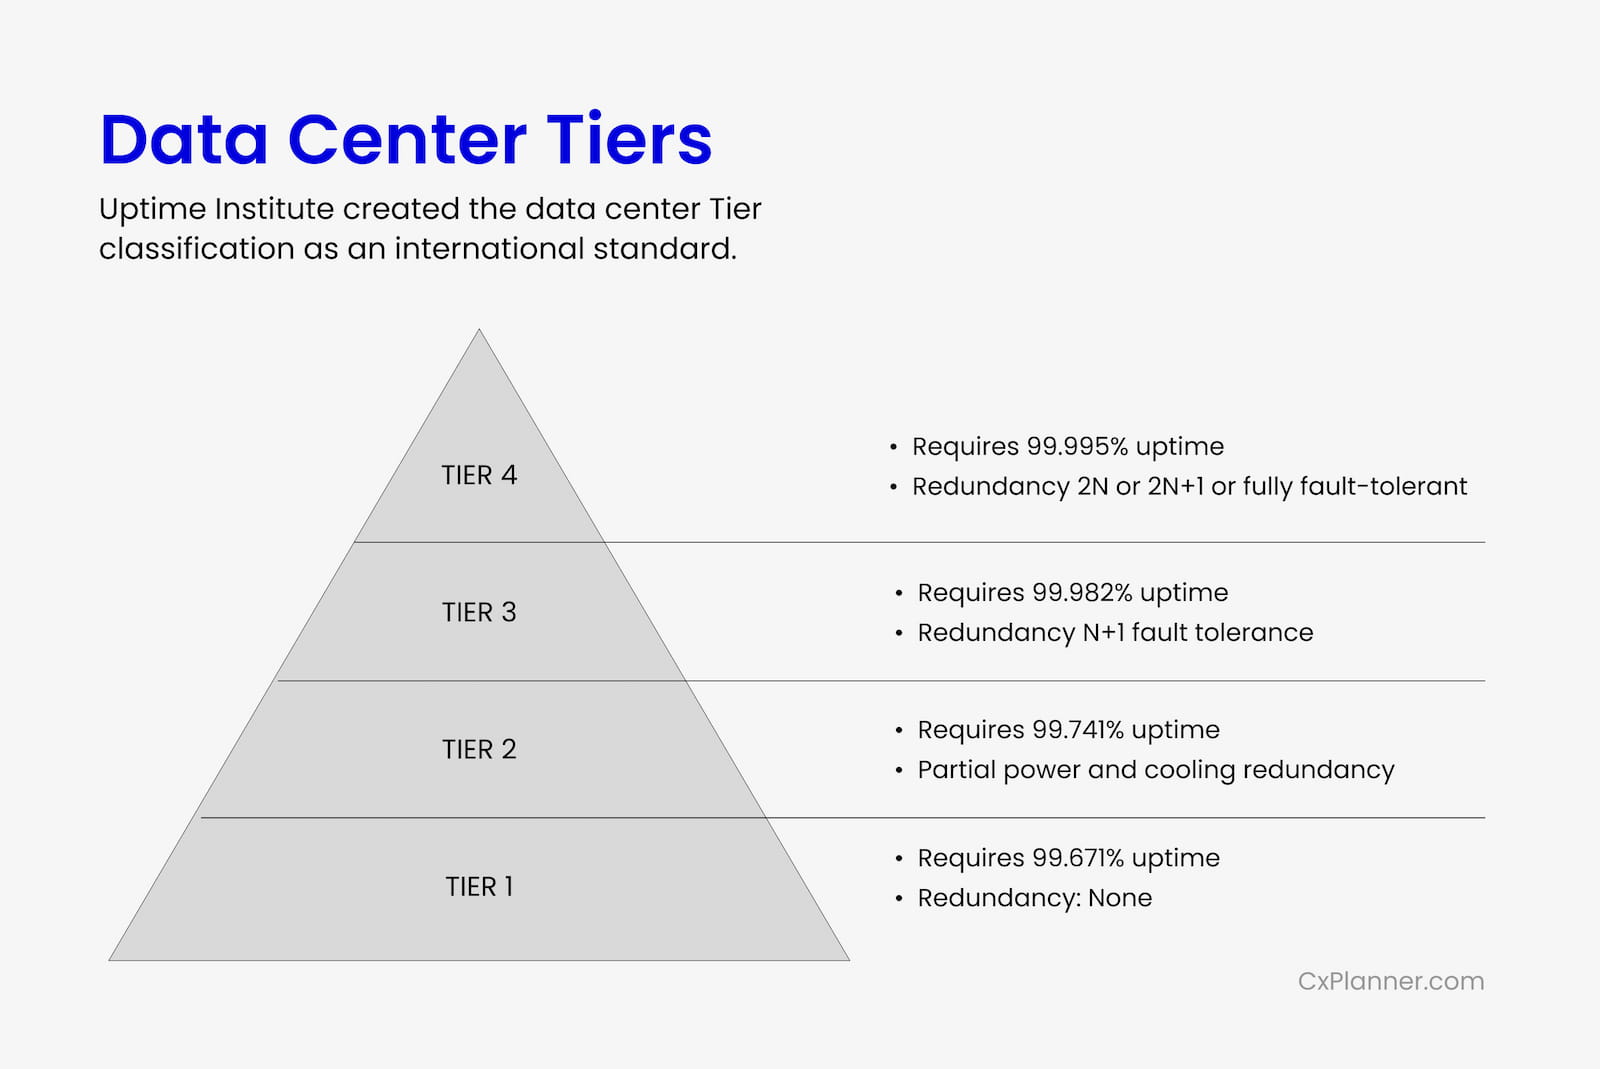 Data center uptime tier levels from 1 to 4